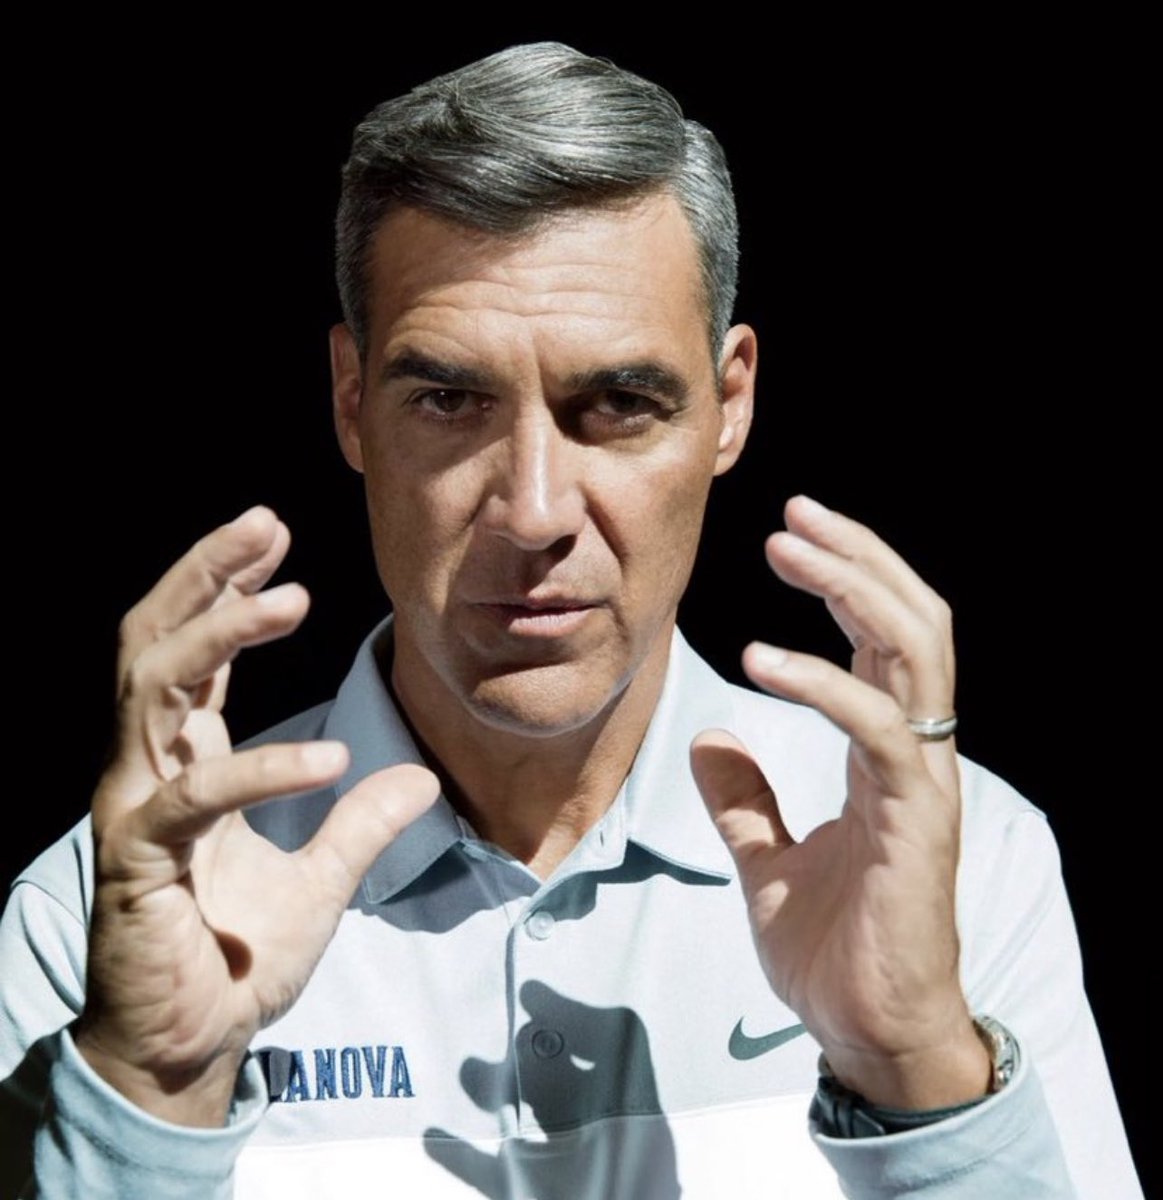 “If you're not humble, it's hard to be coached. If you can't be coached, it's hard to get better.” - Jay Wright